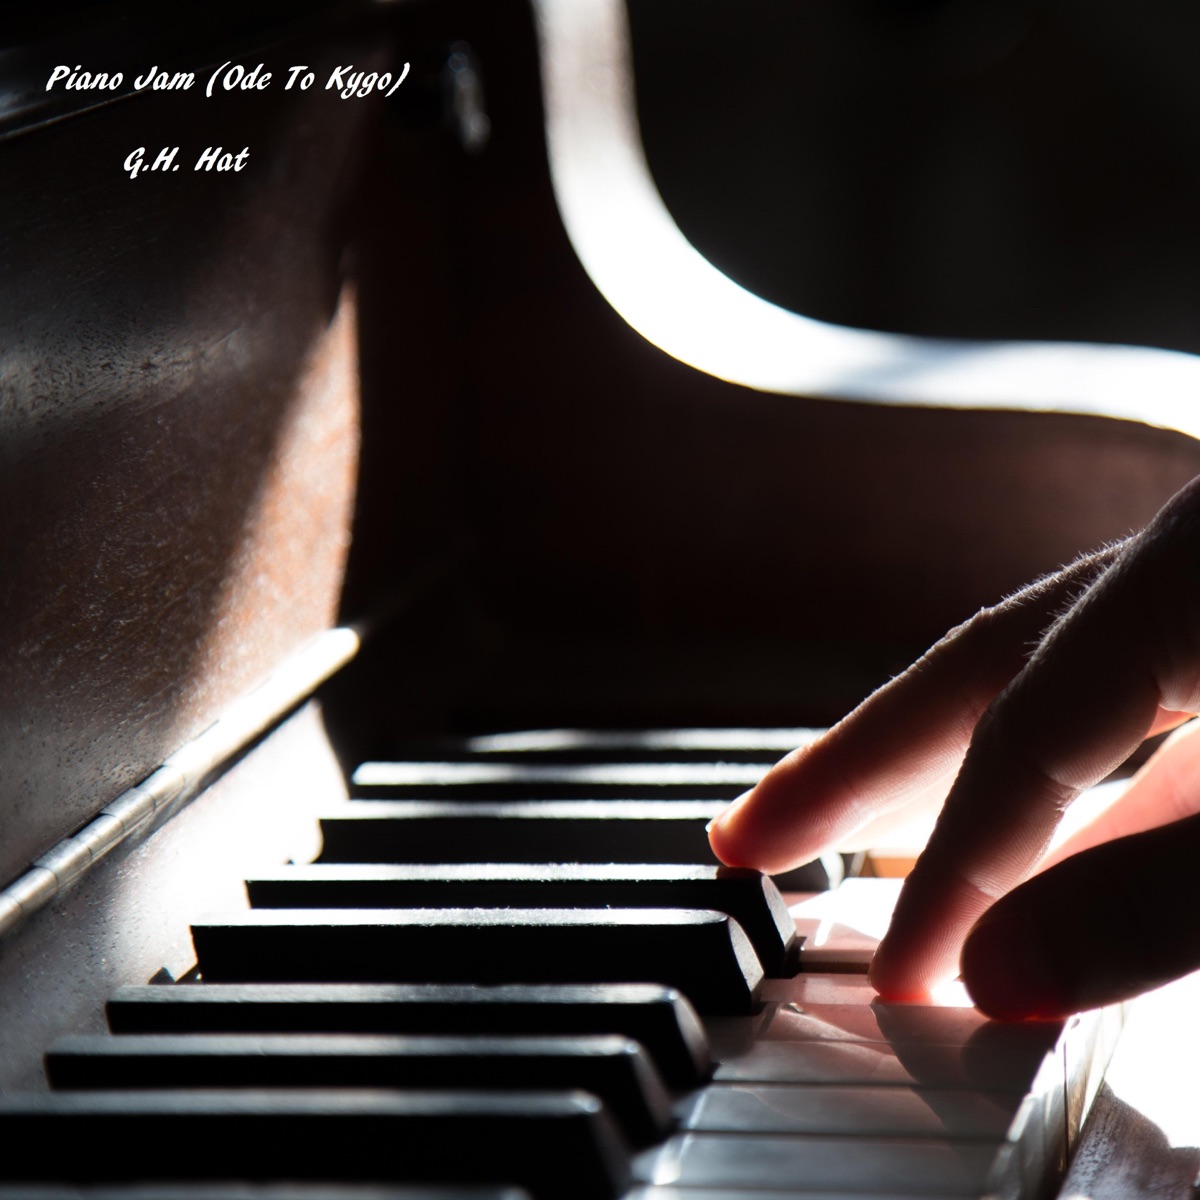 Piano Jam (Ode to Kygo) - Single - Album by G.H. Hat - Apple Music